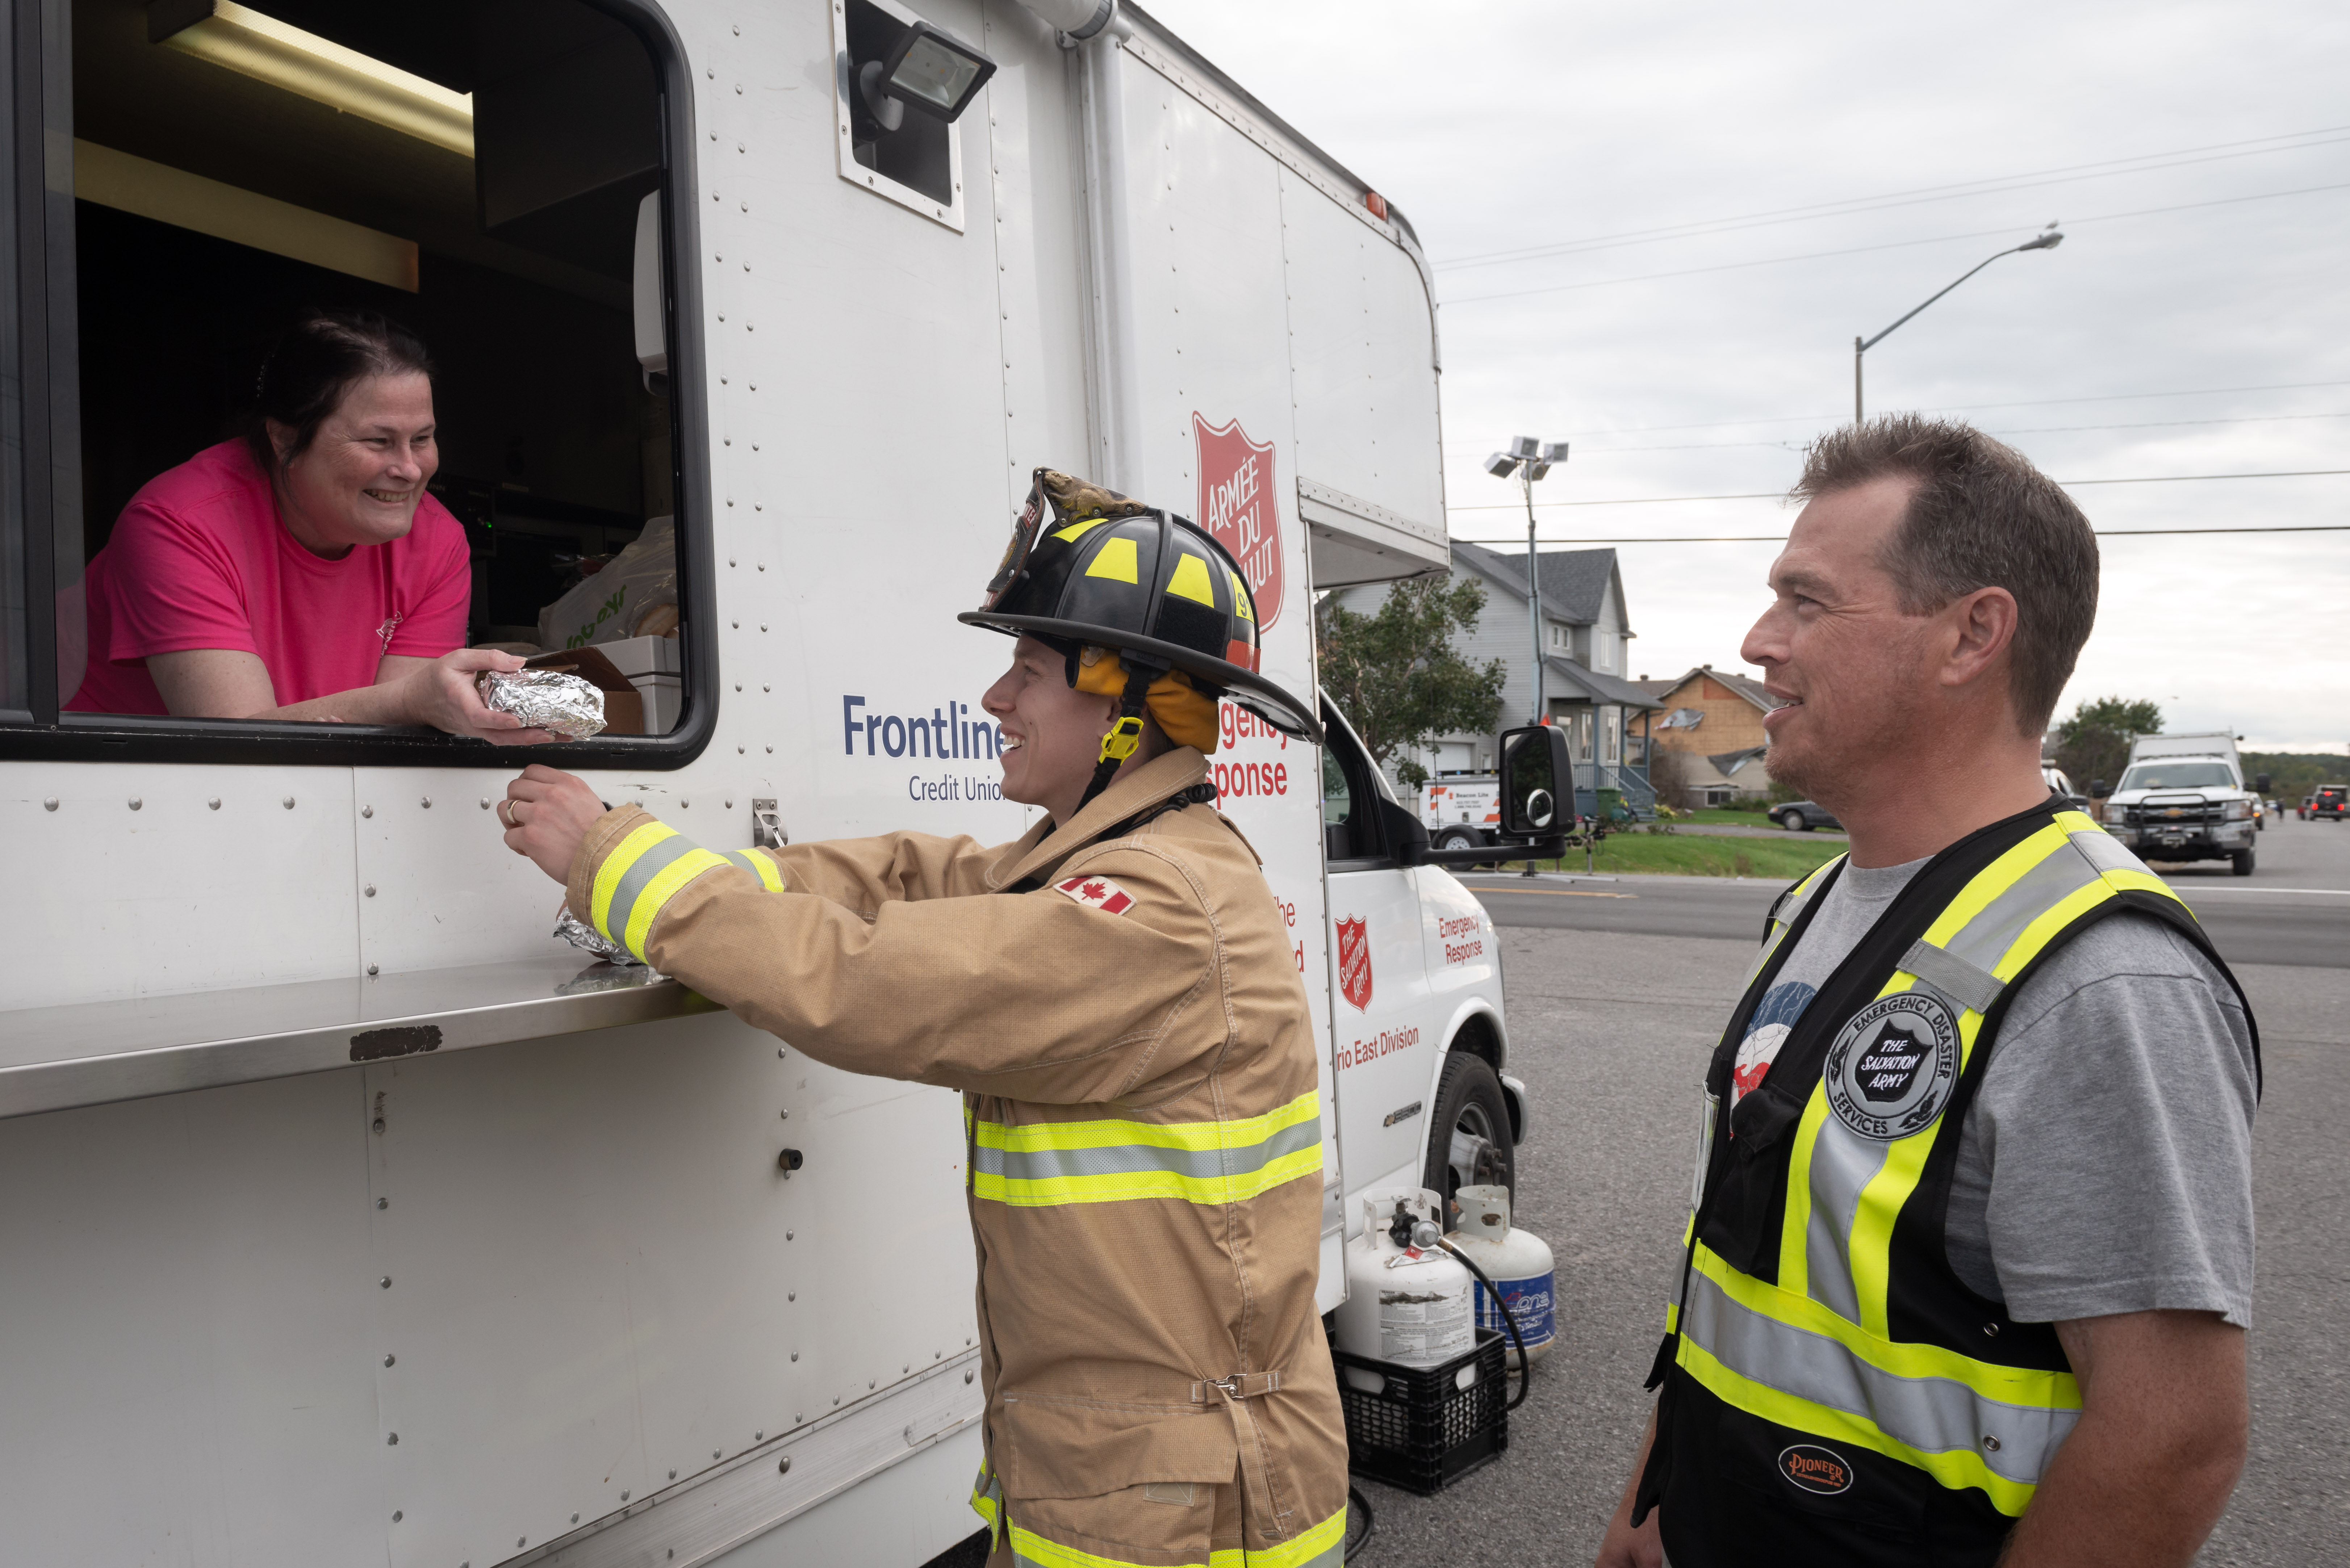 Salvation Army volunteer hands a refreshment to a firefighter from the mobile canteen truck